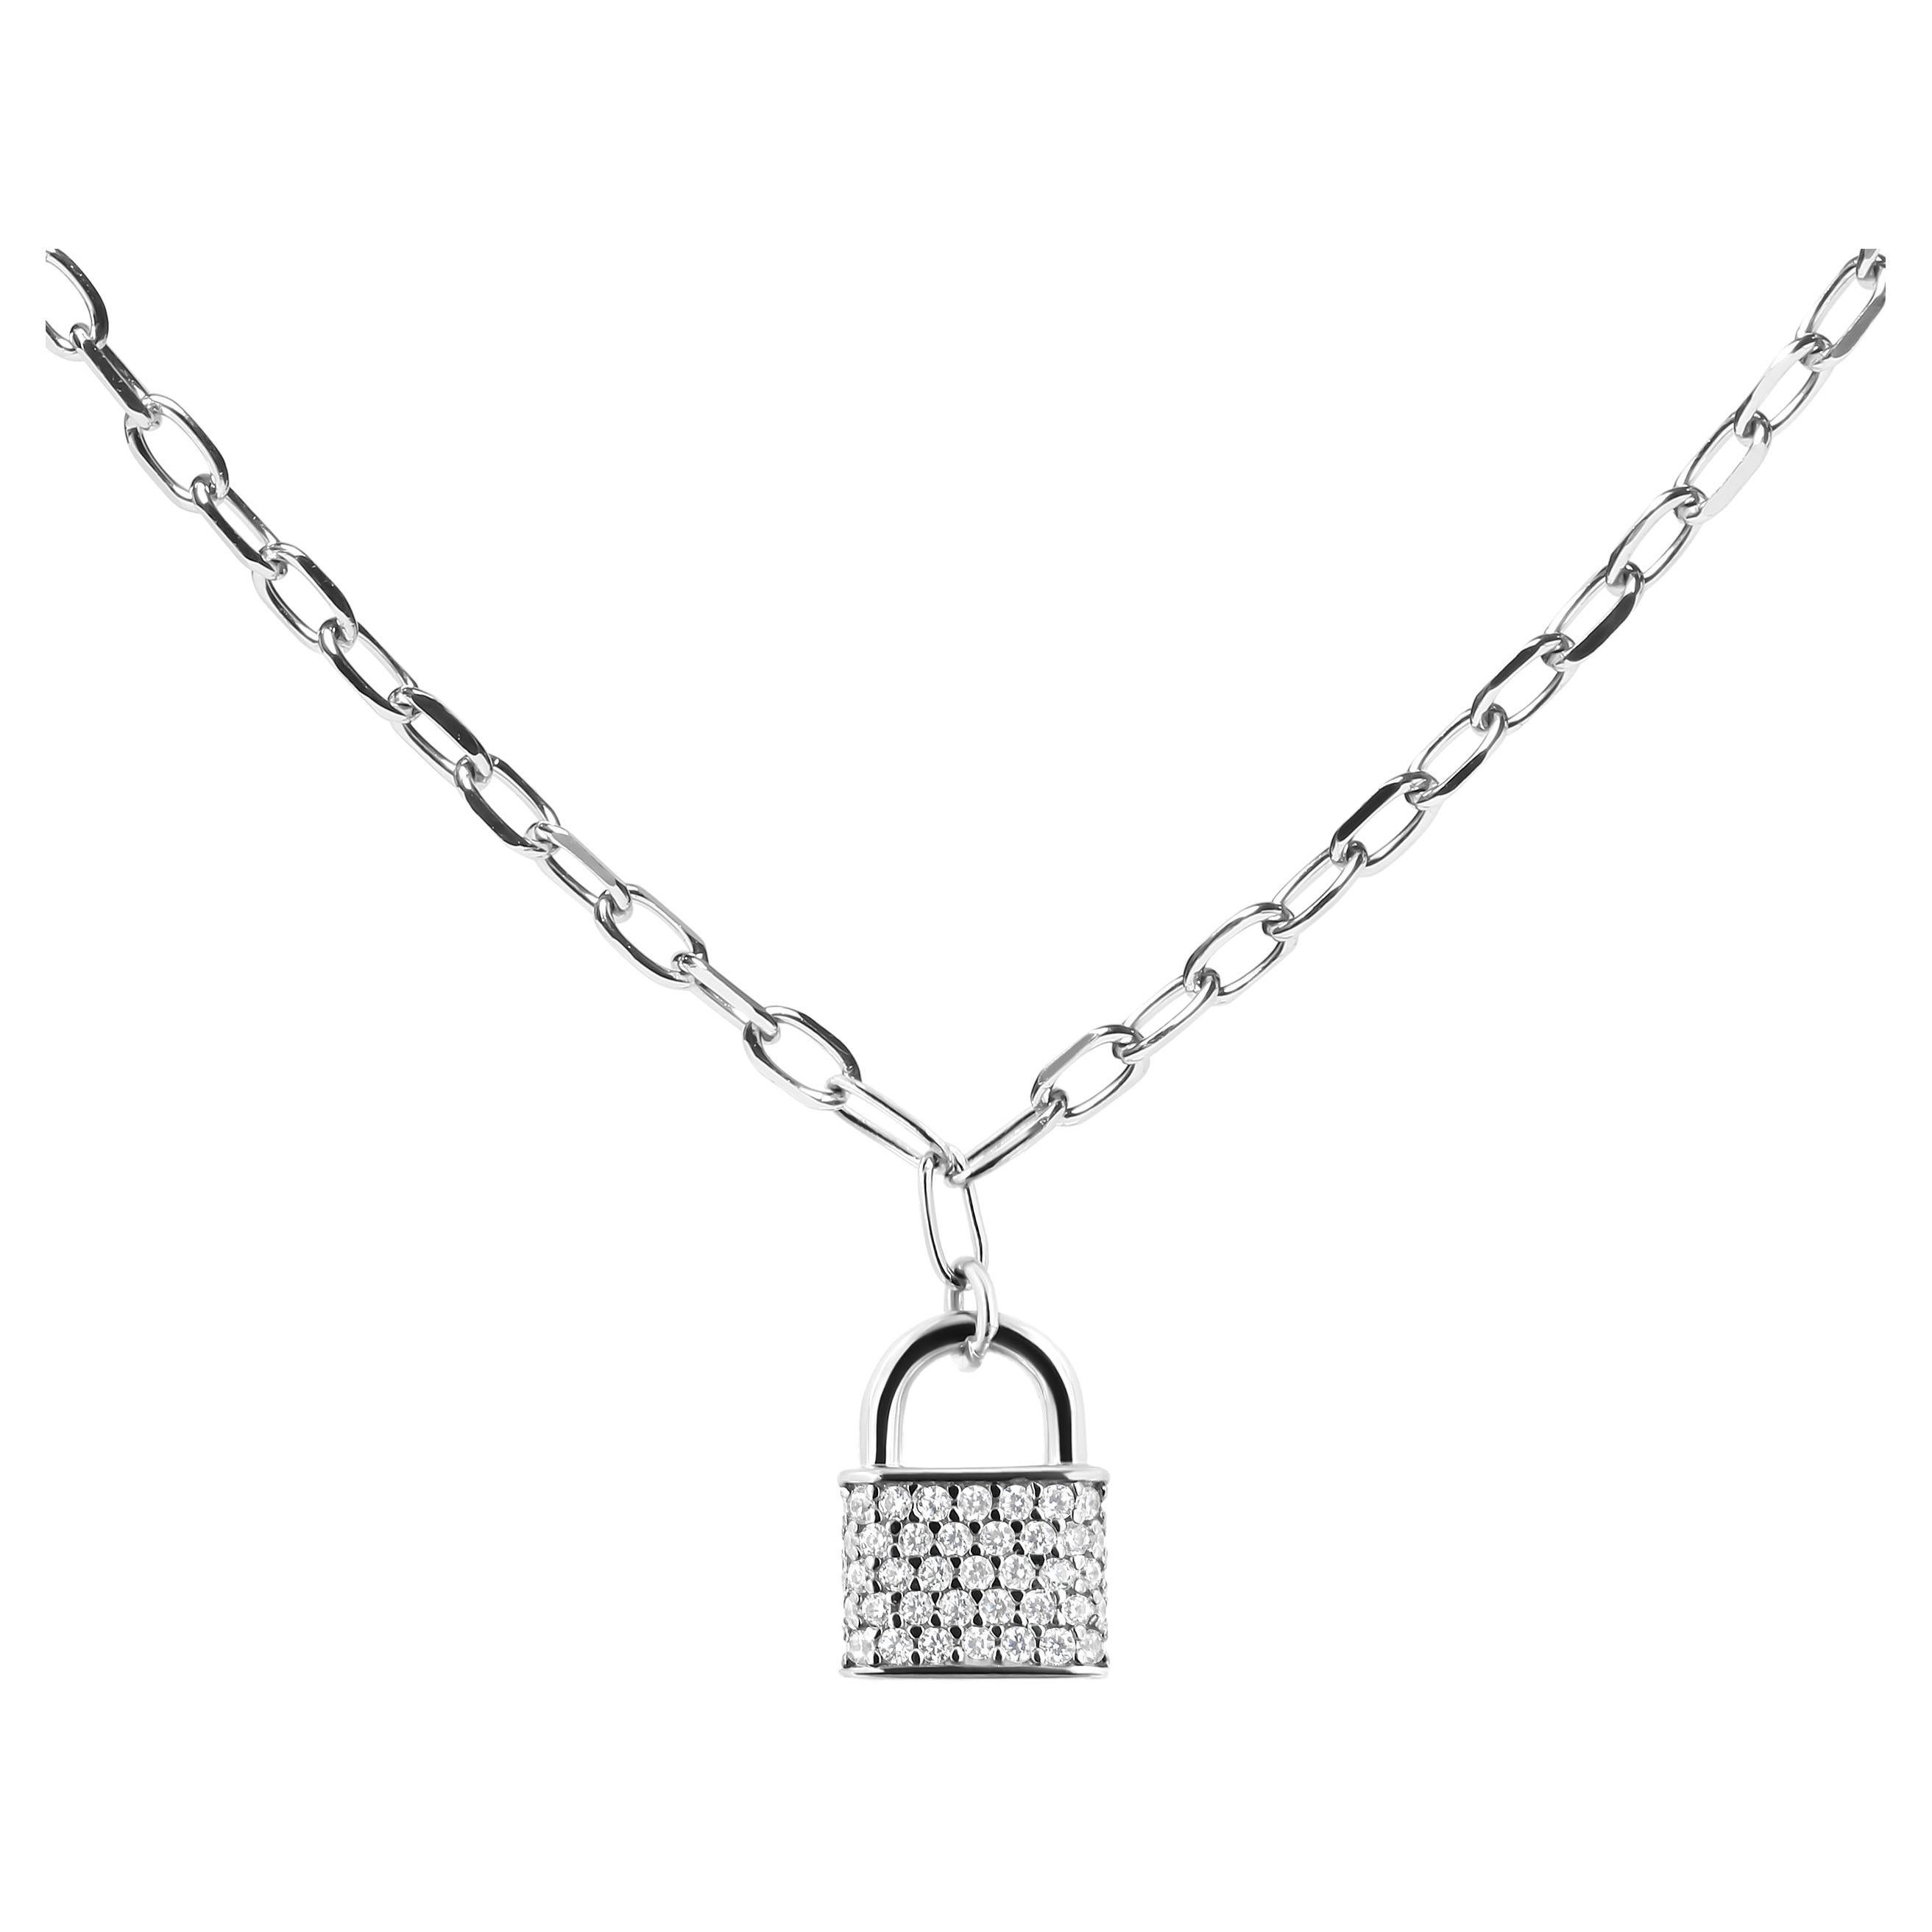 .925 Sterling Silver 1/4 Cttw Diamond Lock Pendant Necklace with Paperclip Chain